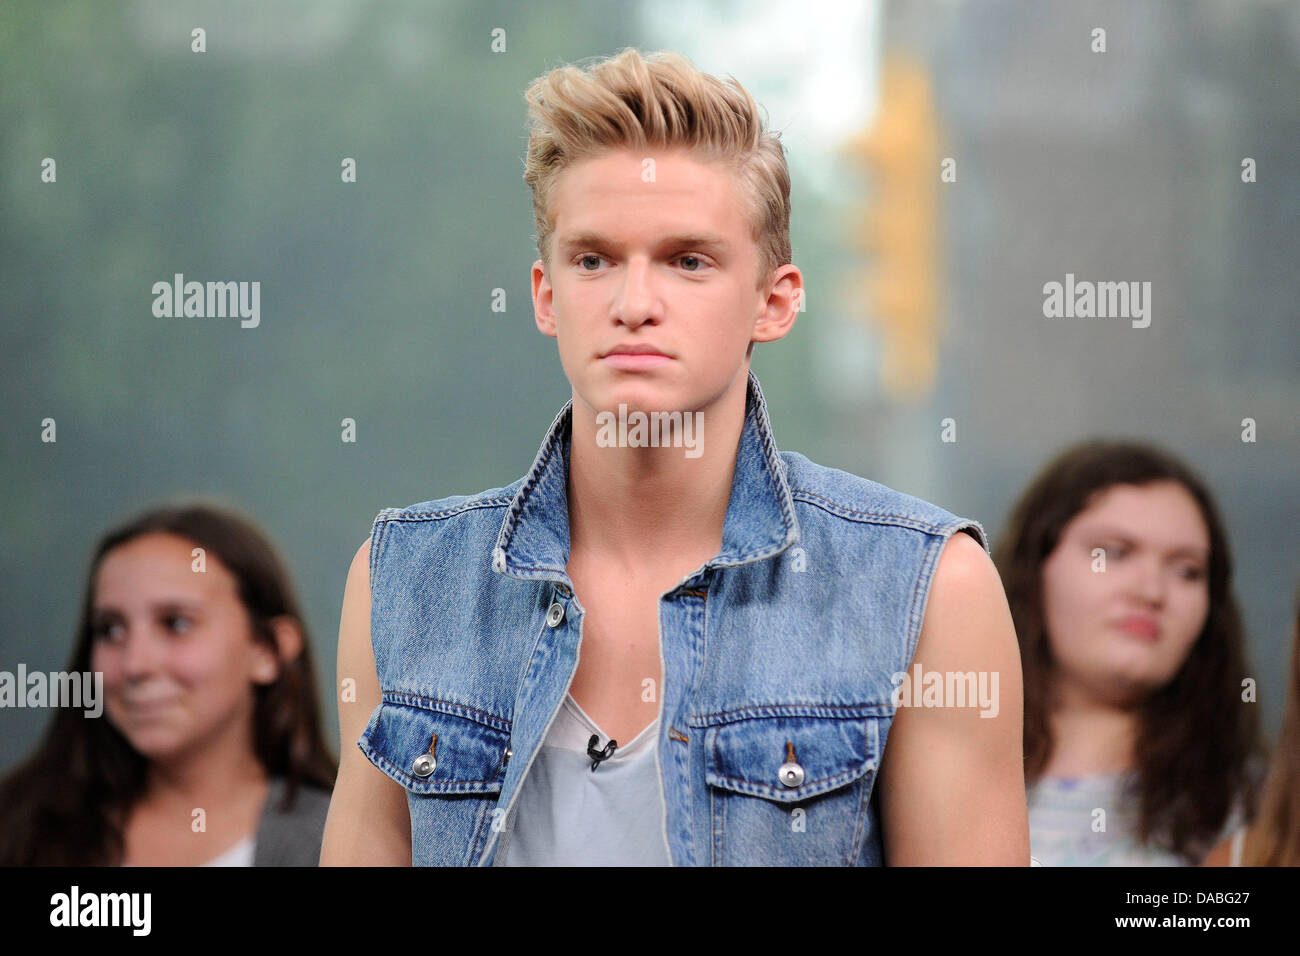 Toronto, Canada. July 9, 2013. Australian singer Cody Simpson co-hosts and performs live at NEW.MUSIC.LIVE show promoting his upcoming album SURFERS PARADISE. Credit: EXImages/Alamy Live News Photo - Alamy